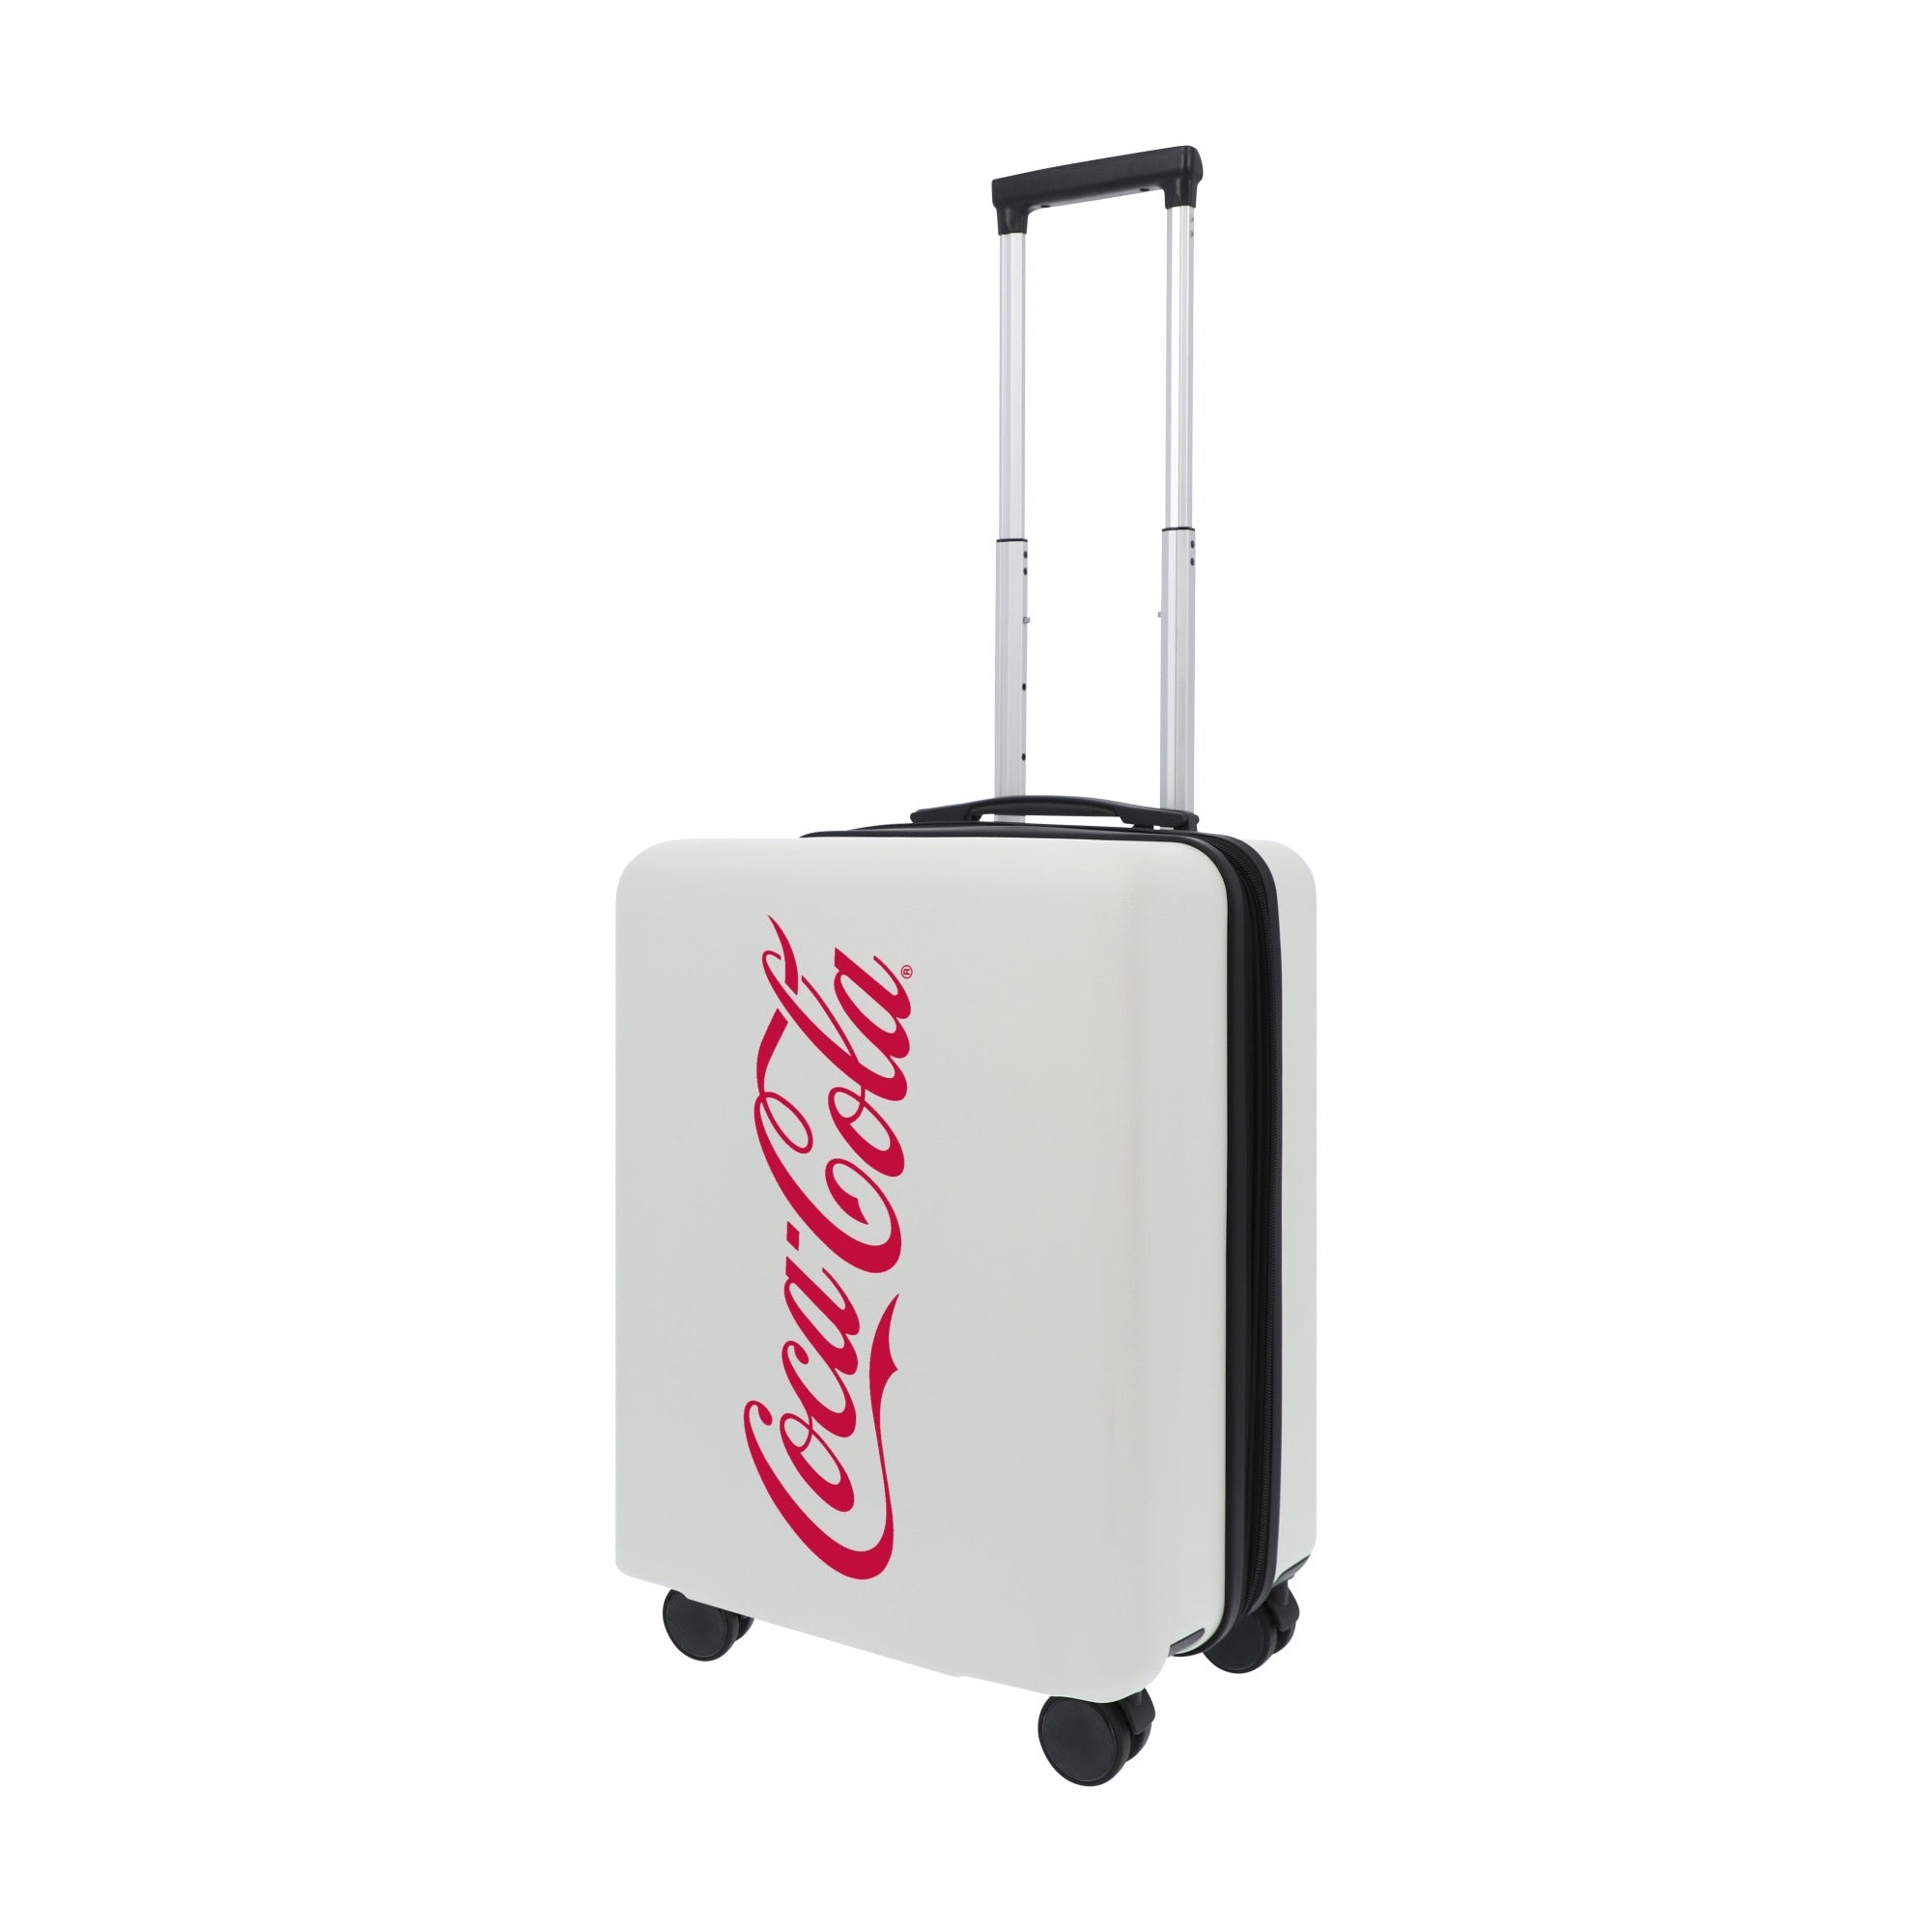 White coca cola 22.5" carry-on spinner suitcase luggage by Ful